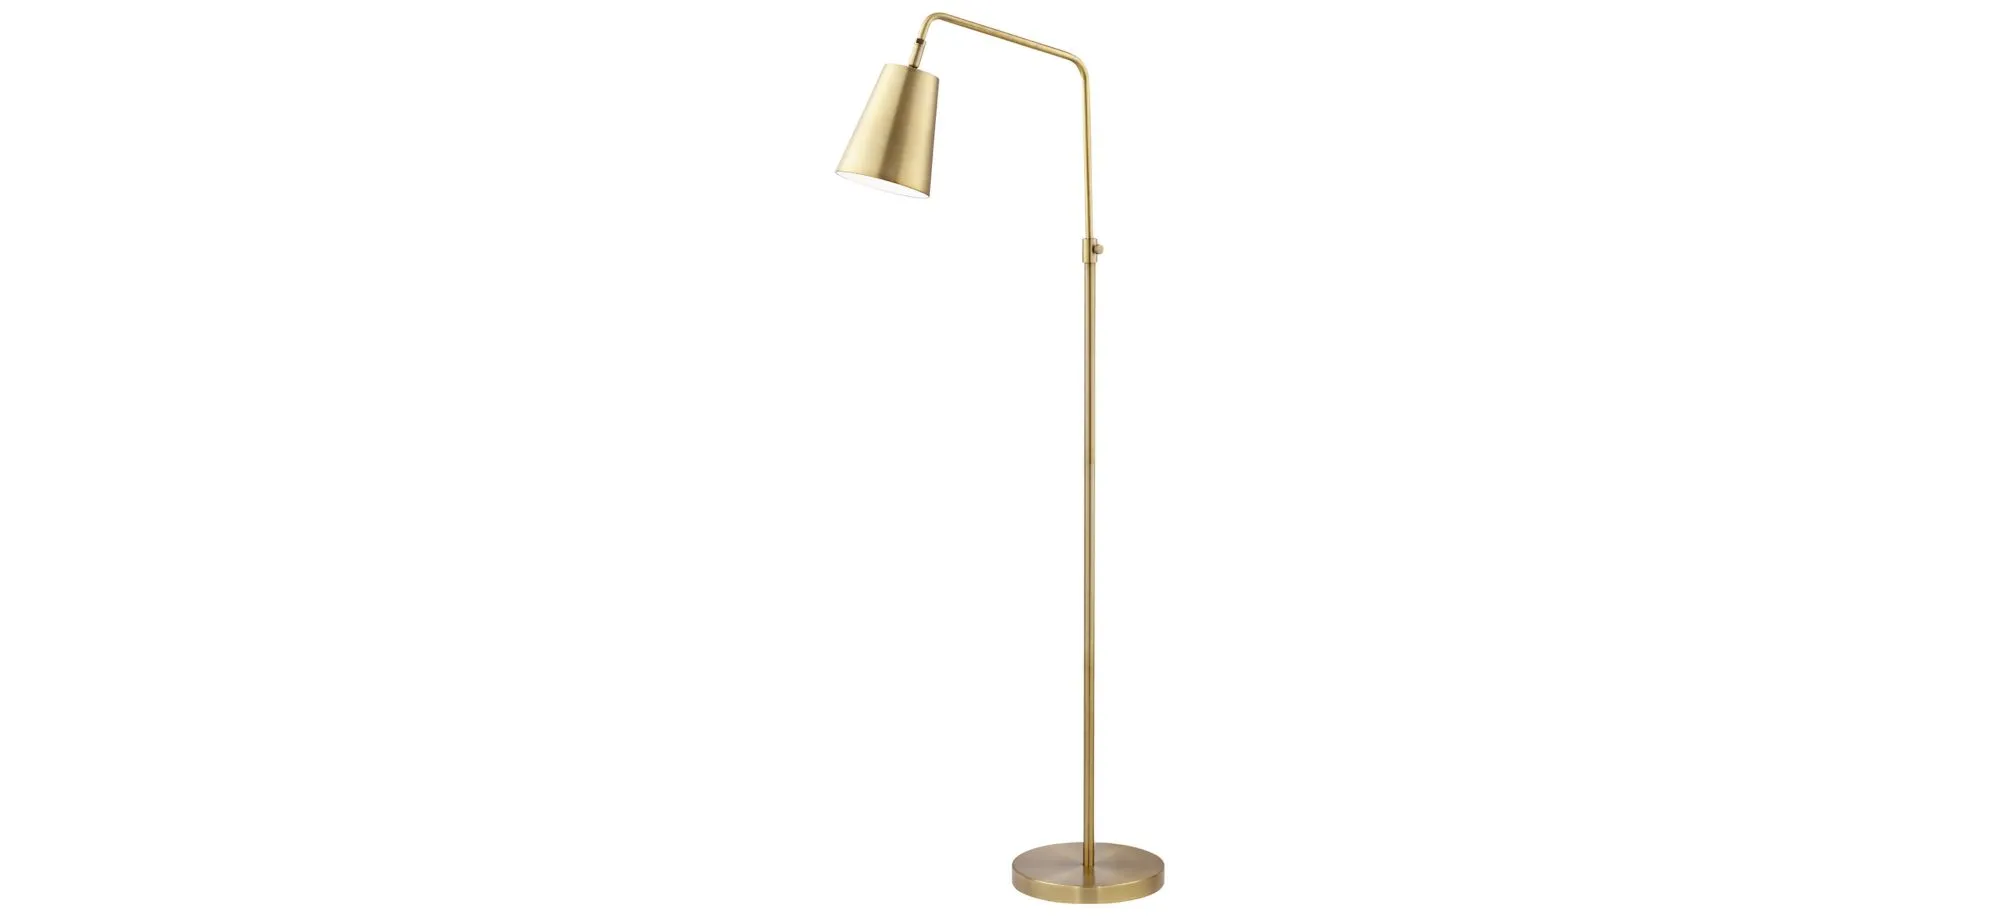 Zella Floor Lamp in Brushed Antique by Pacific Coast